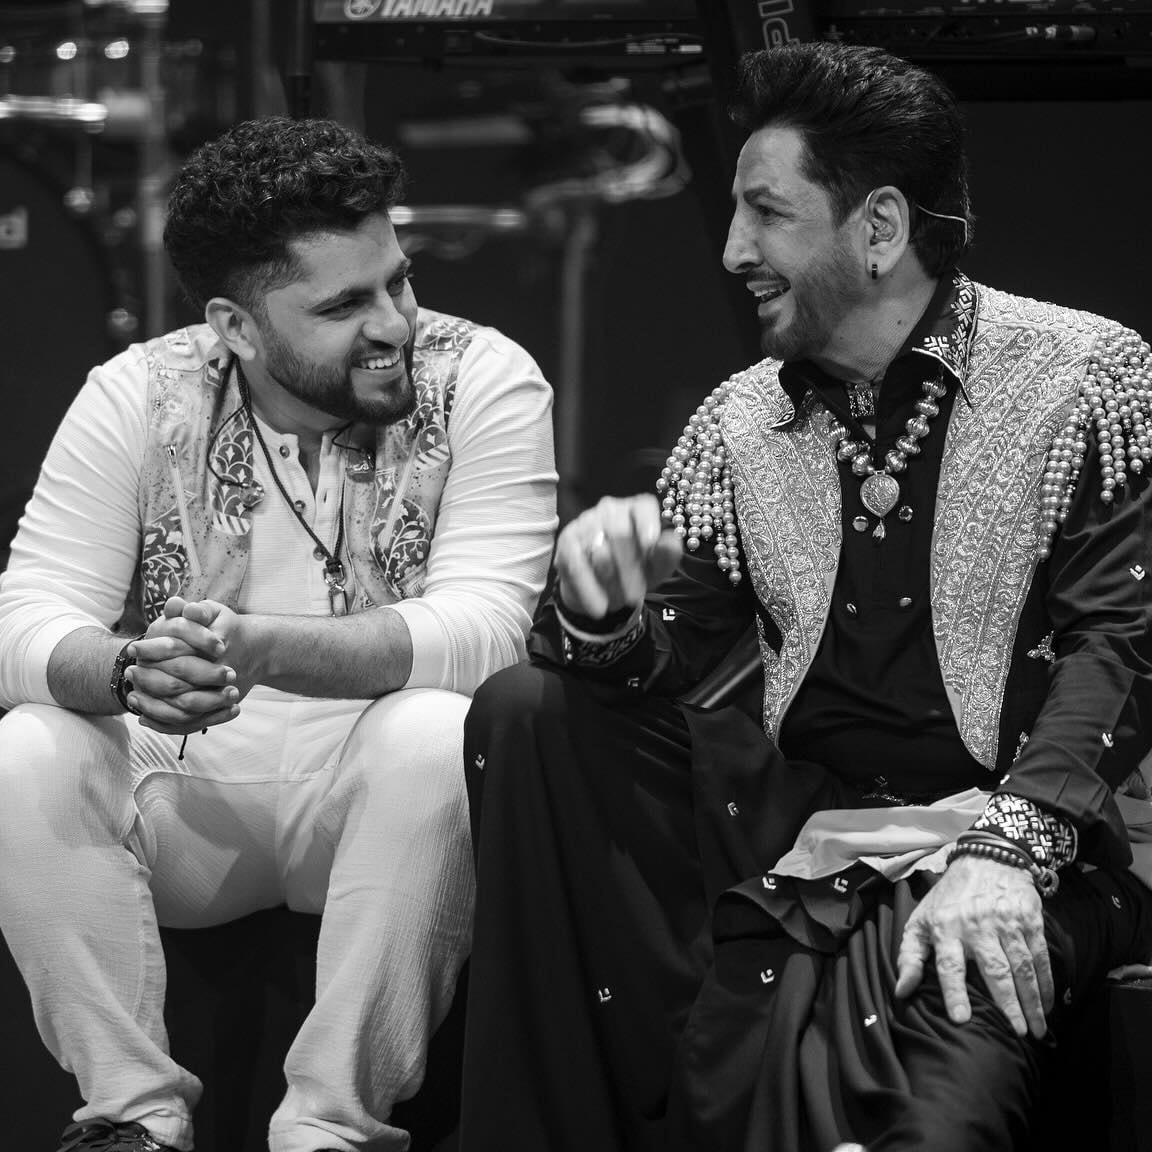 Raj Pandit shared a picture full of Joy and emotions with Ace singer Gurdas Maan.

#expansionpr #gurdasmaan #gurdaasmaan #singer #rajpandit